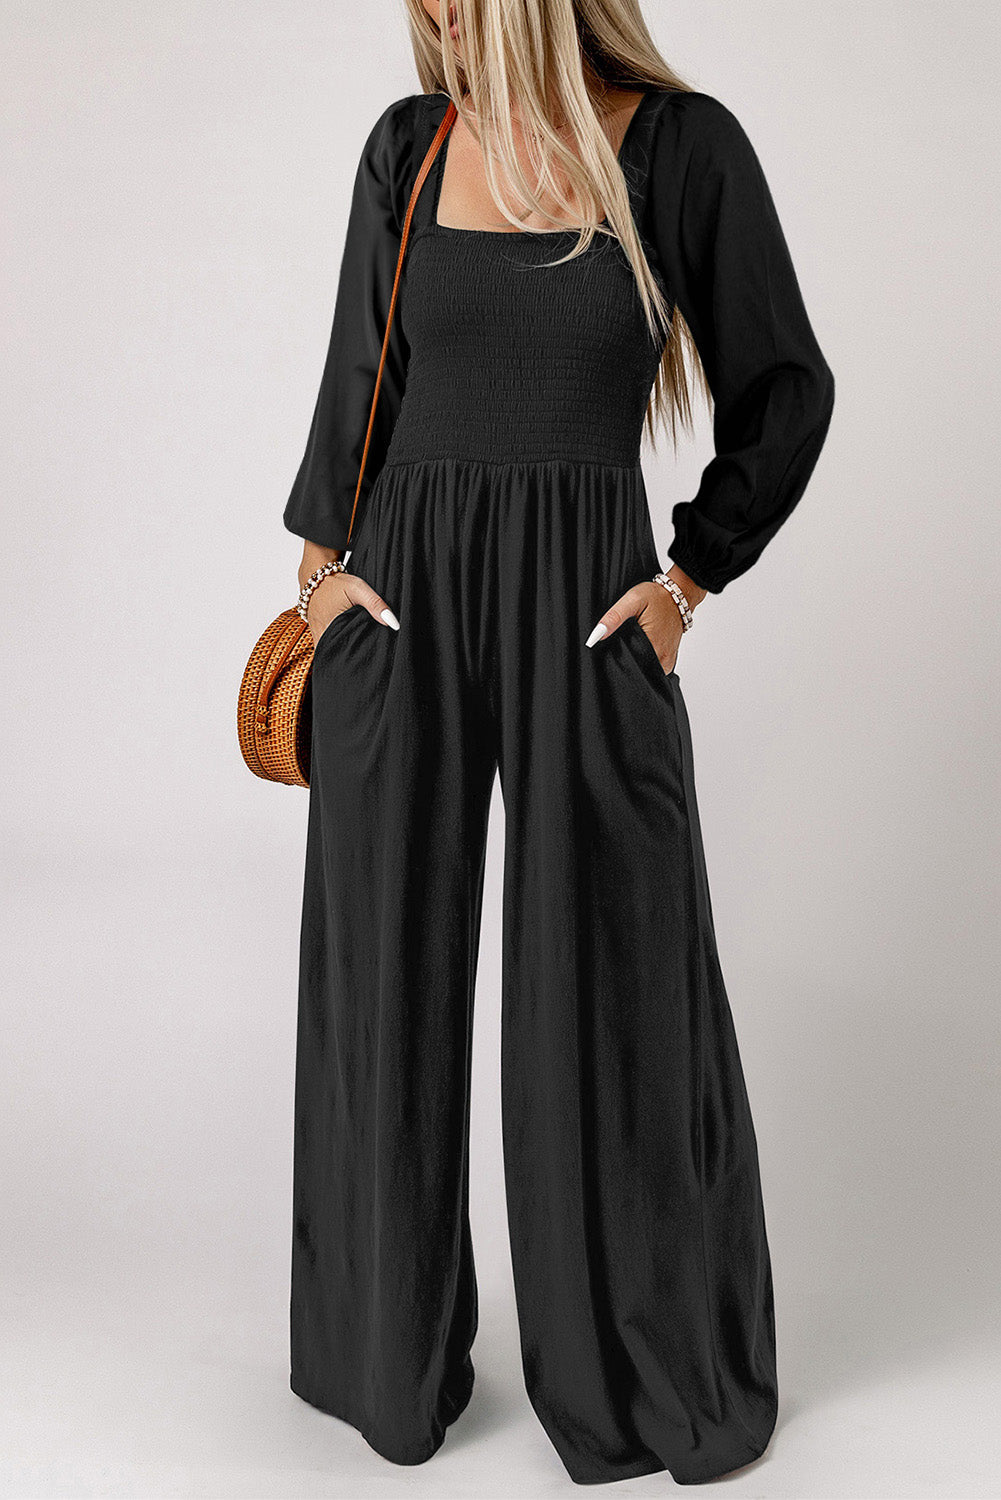 Savvi Jumpsuit-SHIPS DIRECTLY TO YOU!